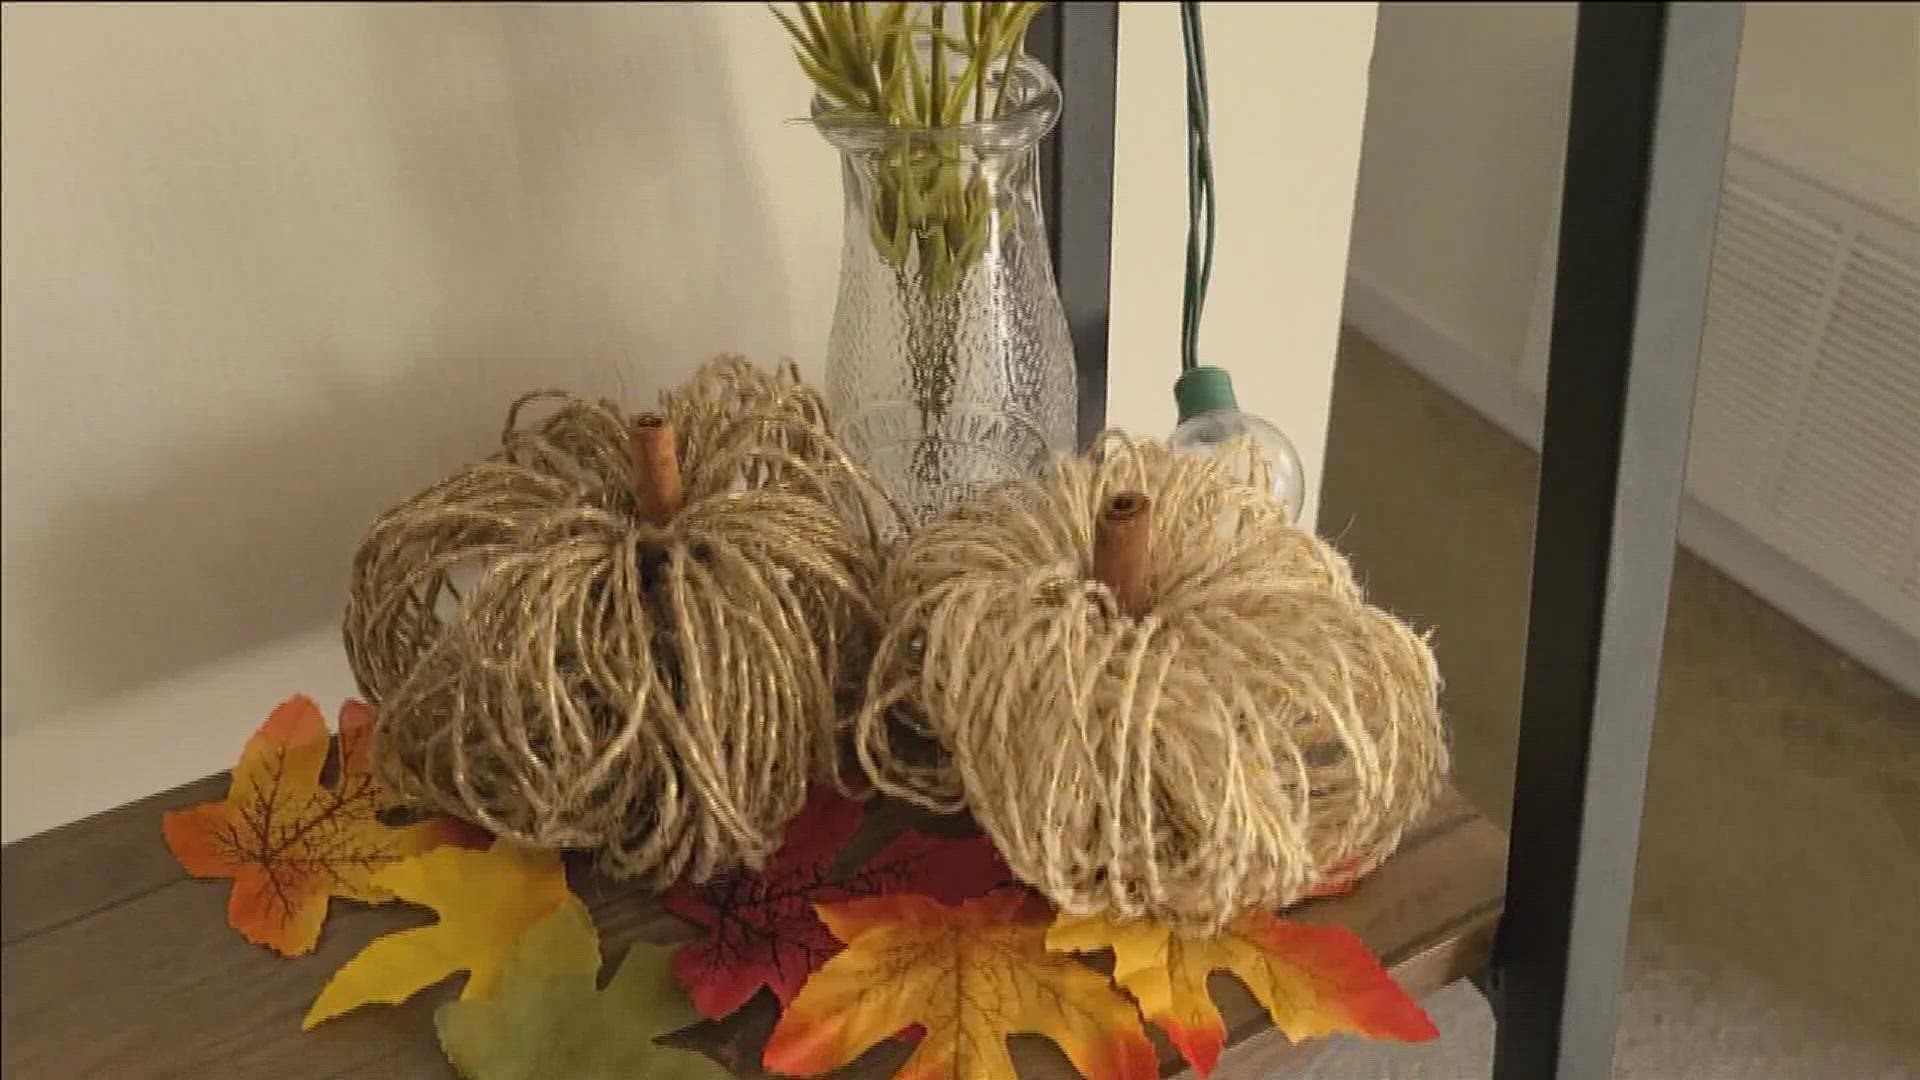 Showcase your love for Fall using Kyra Black's easy DIY pumpkin décor tutorial! All you need is twine, cinnamon sticks, a hot glue gun, scissors, and wire. Simple!